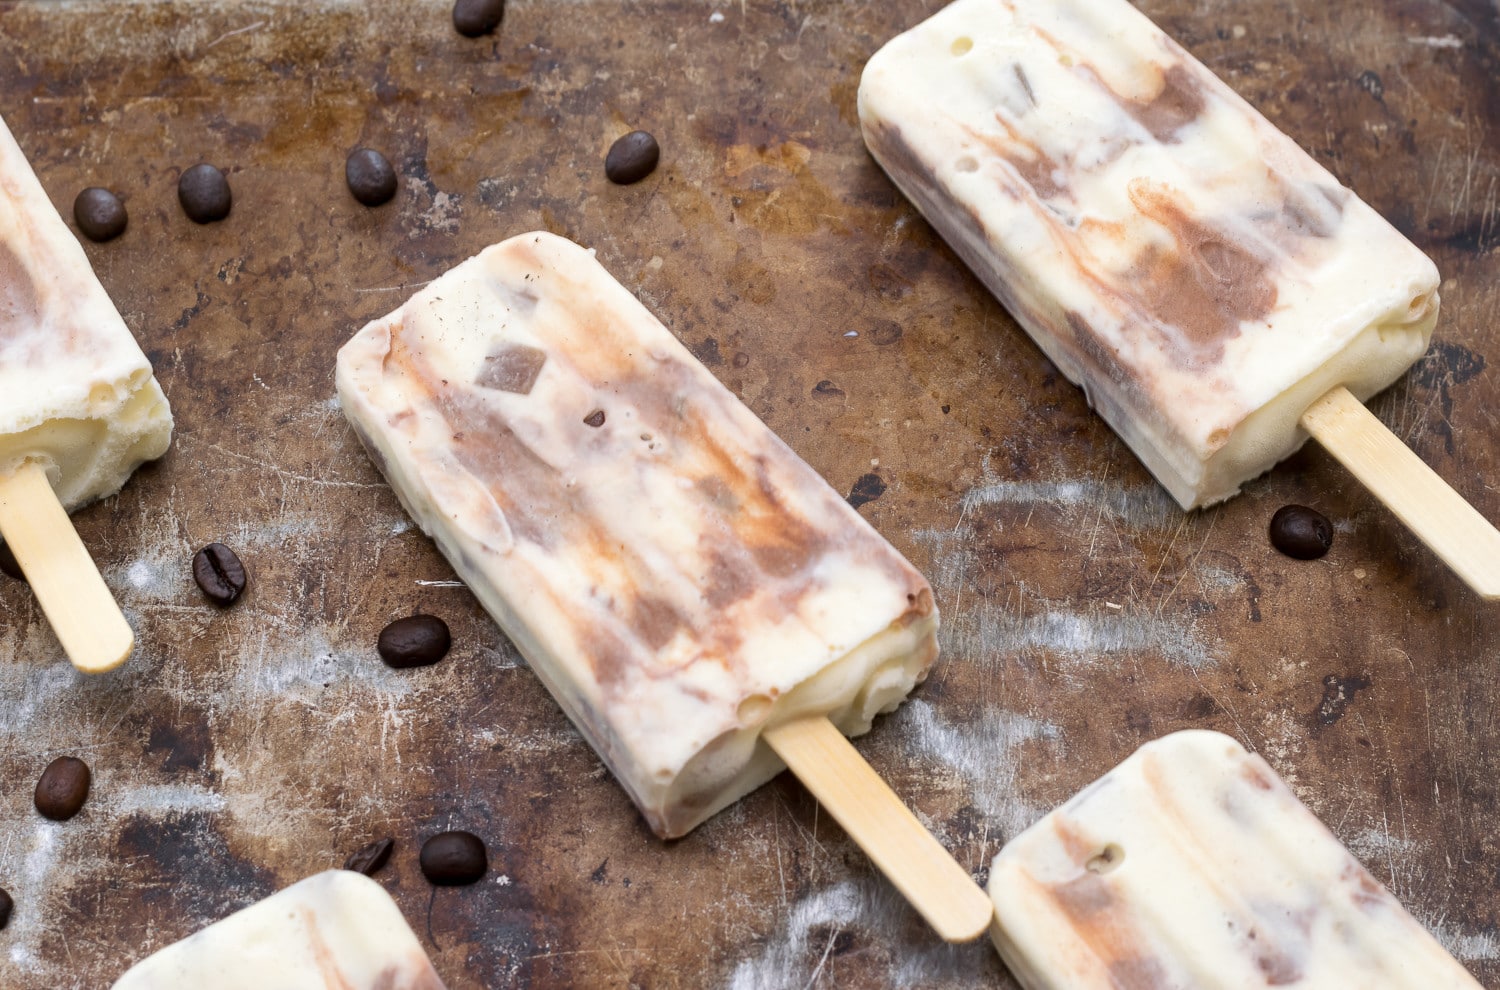 Coffee anyone? Vanilla Ice cream, Chocolate Ribbons and Iced Coffee Cubes make these Iced Mocha Latte Popsicles the perfect hot summer treat.